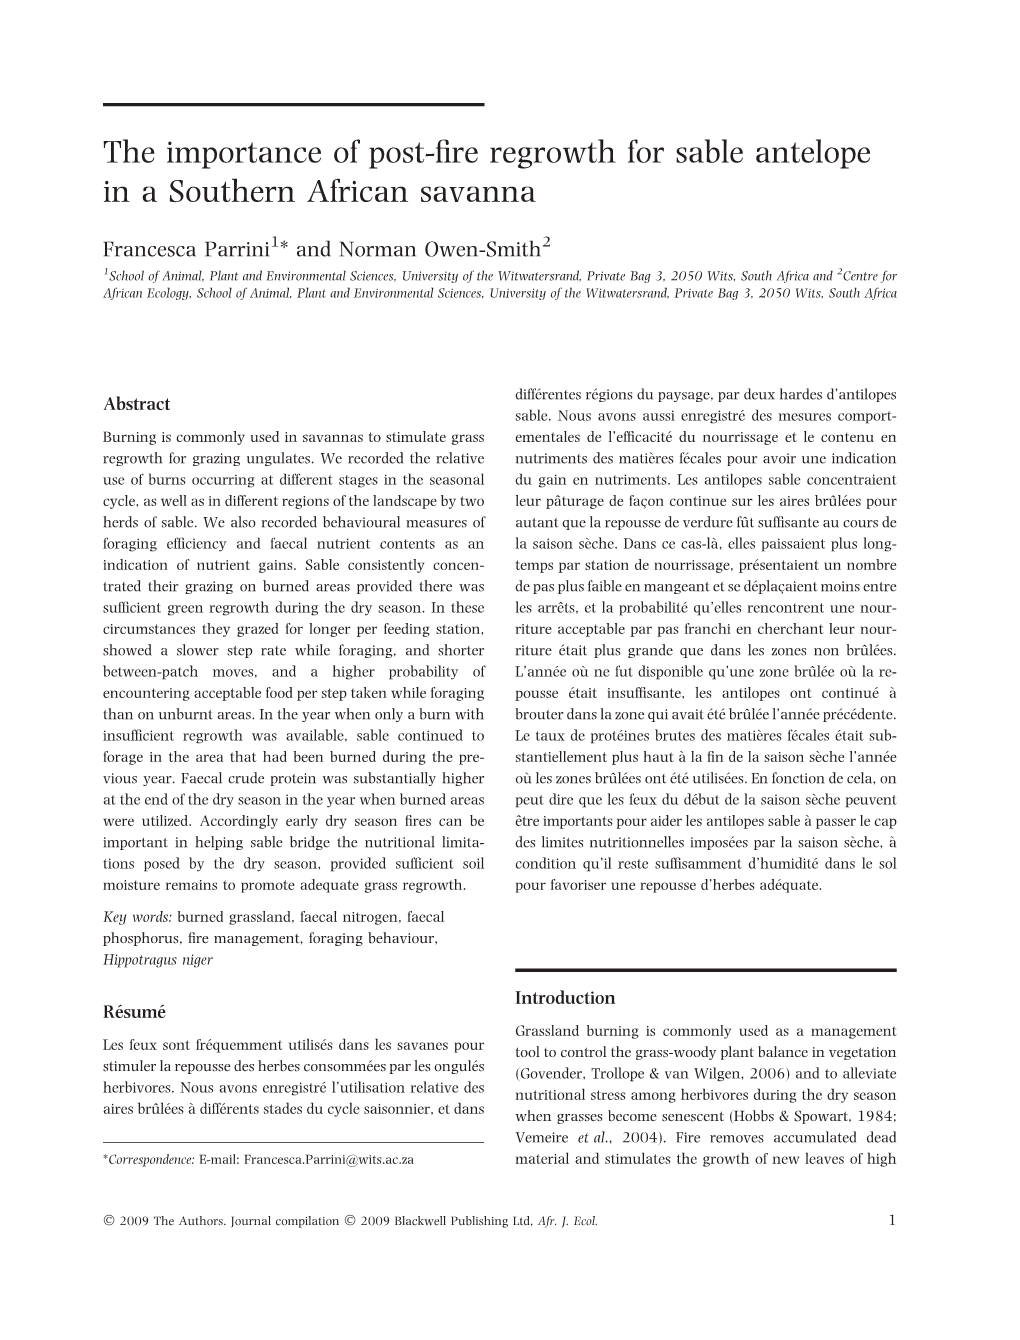 The Importance of Post-Fire Regrowth for Sable Antelope in a Southern